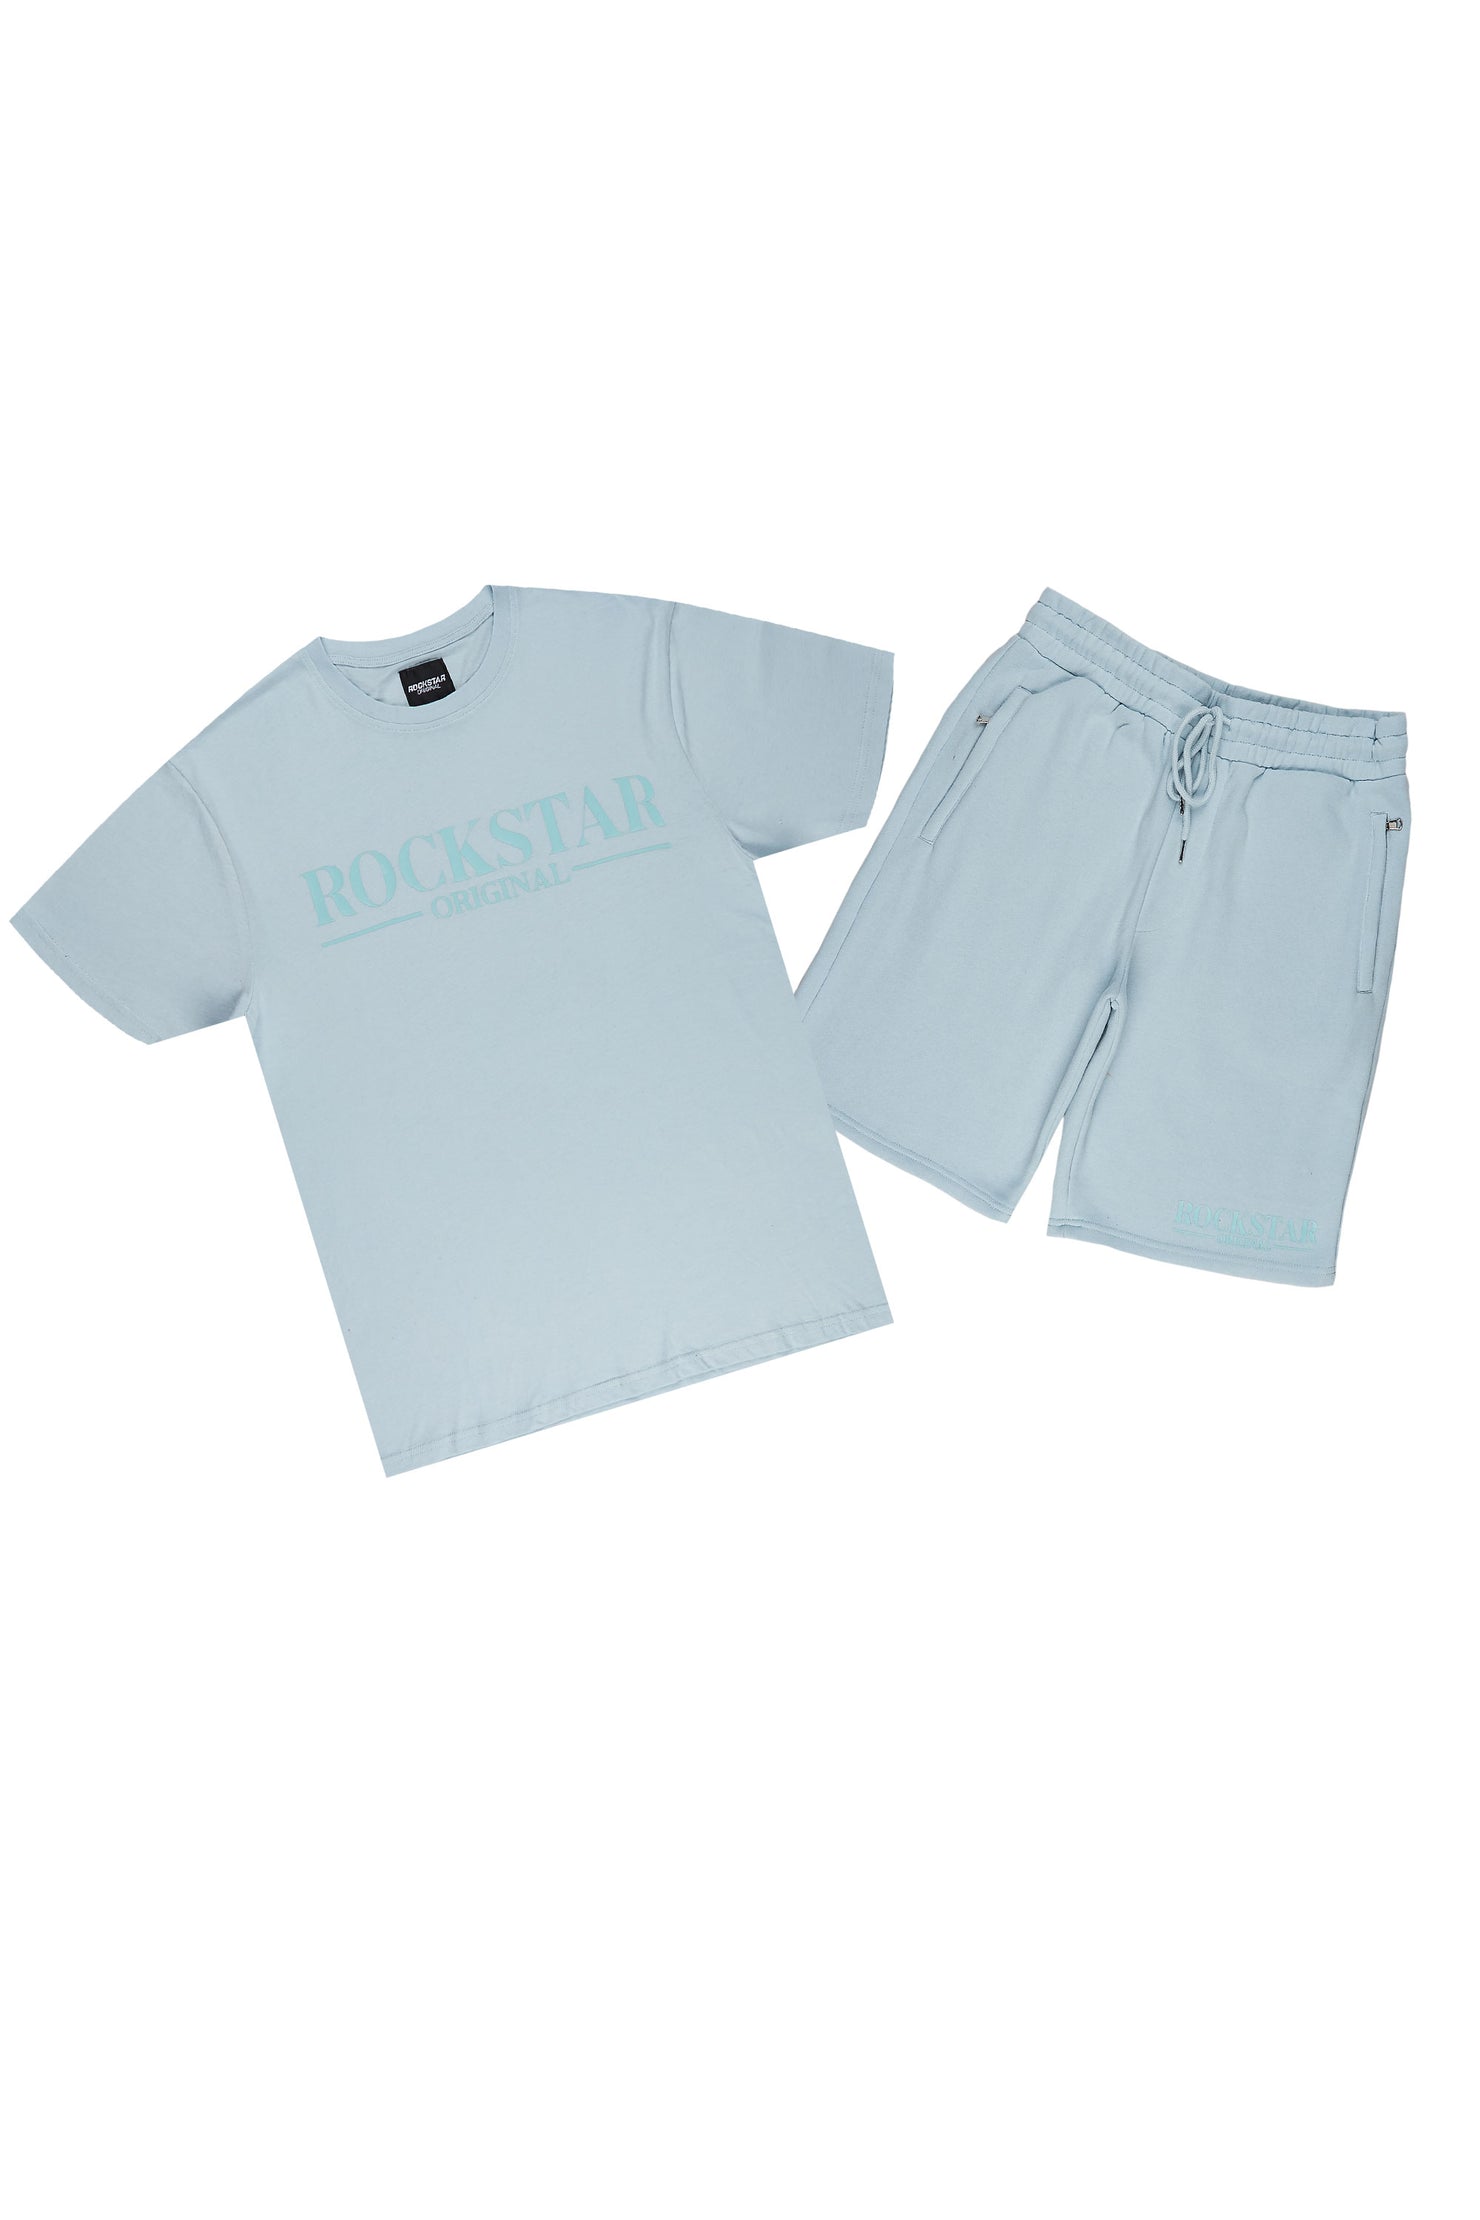 Billy Baby Blue Graphic T-Shirt Short Set